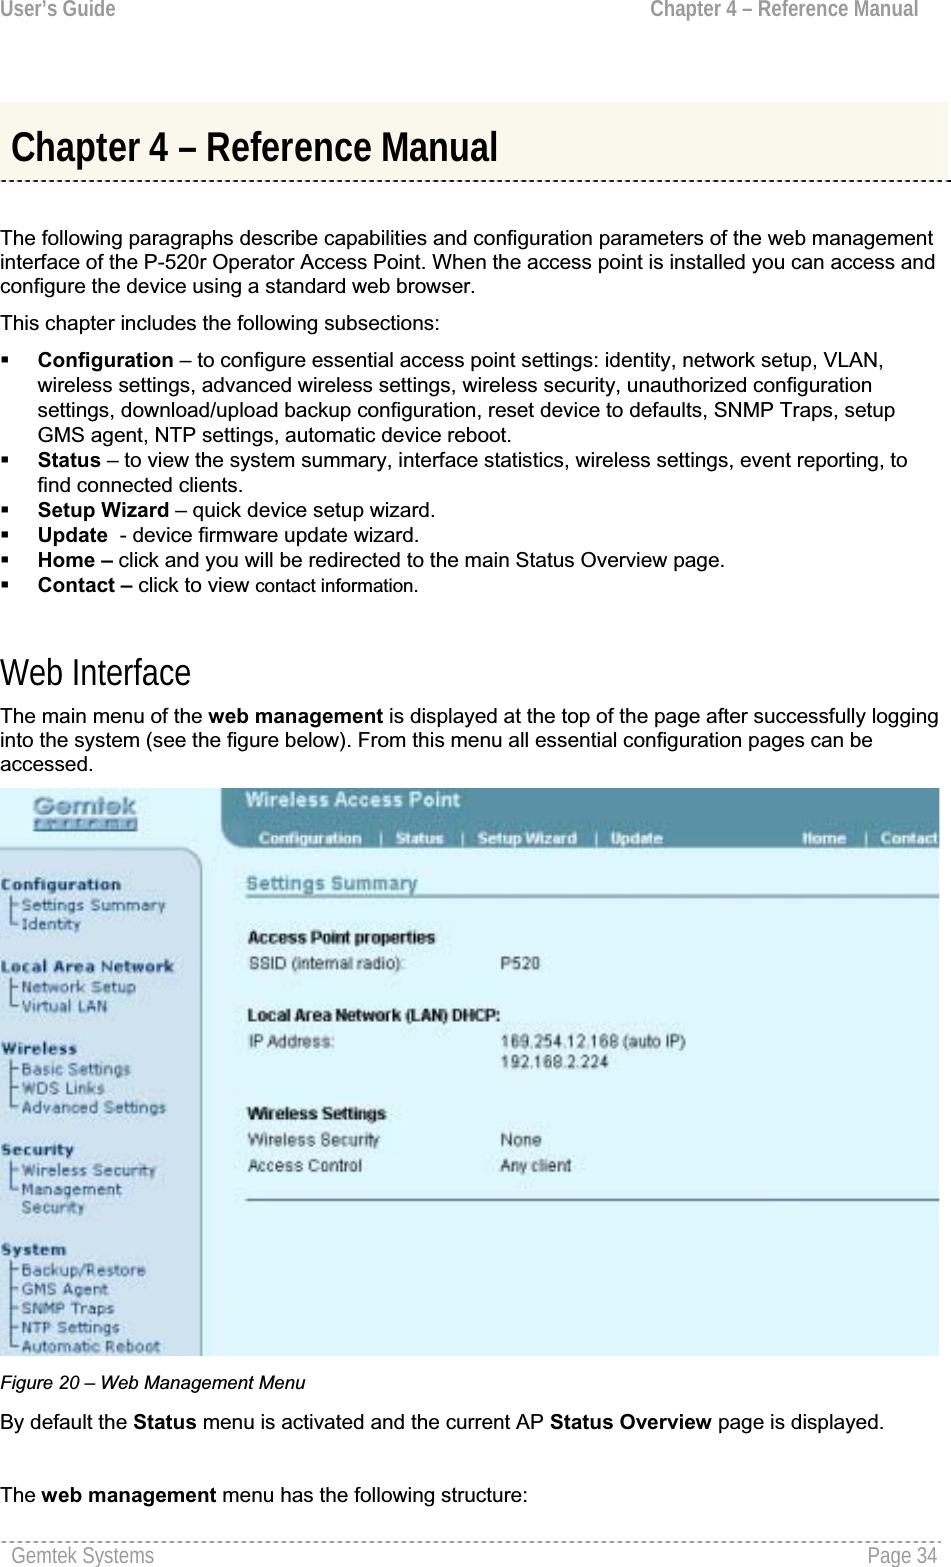 User’s Guide  Chapter 4 – Reference ManualChapter 4 – Reference Manual The following paragraphs describe capabilities and configuration parameters of the web managementinterface of the P-520r Operator Access Point. When the access point is installed you can access and configure the device using a standard web browser.This chapter includes the following subsections:Configuration – to configure essential access point settings: identity, network setup, VLAN, wireless settings, advanced wireless settings, wireless security, unauthorized configurationsettings, download/upload backup configuration, reset device to defaults, SNMP Traps, setupGMS agent, NTP settings, automatic device reboot.Status – to view the system summary, interface statistics, wireless settings, event reporting, to find connected clients.Setup Wizard – quick device setup wizard.Update  - device firmware update wizard.Home – click and you will be redirected to the main Status Overview page.Contact – click to view contact information.Web InterfaceThe main menu of the web management is displayed at the top of the page after successfully logginginto the system (see the figure below). From this menu all essential configuration pages can beaccessed.Figure 20 – Web Management Menu By default the Status menu is activated and the current AP Status Overview page is displayed.The web management menu has the following structure: Gemtek Systems  Page 34